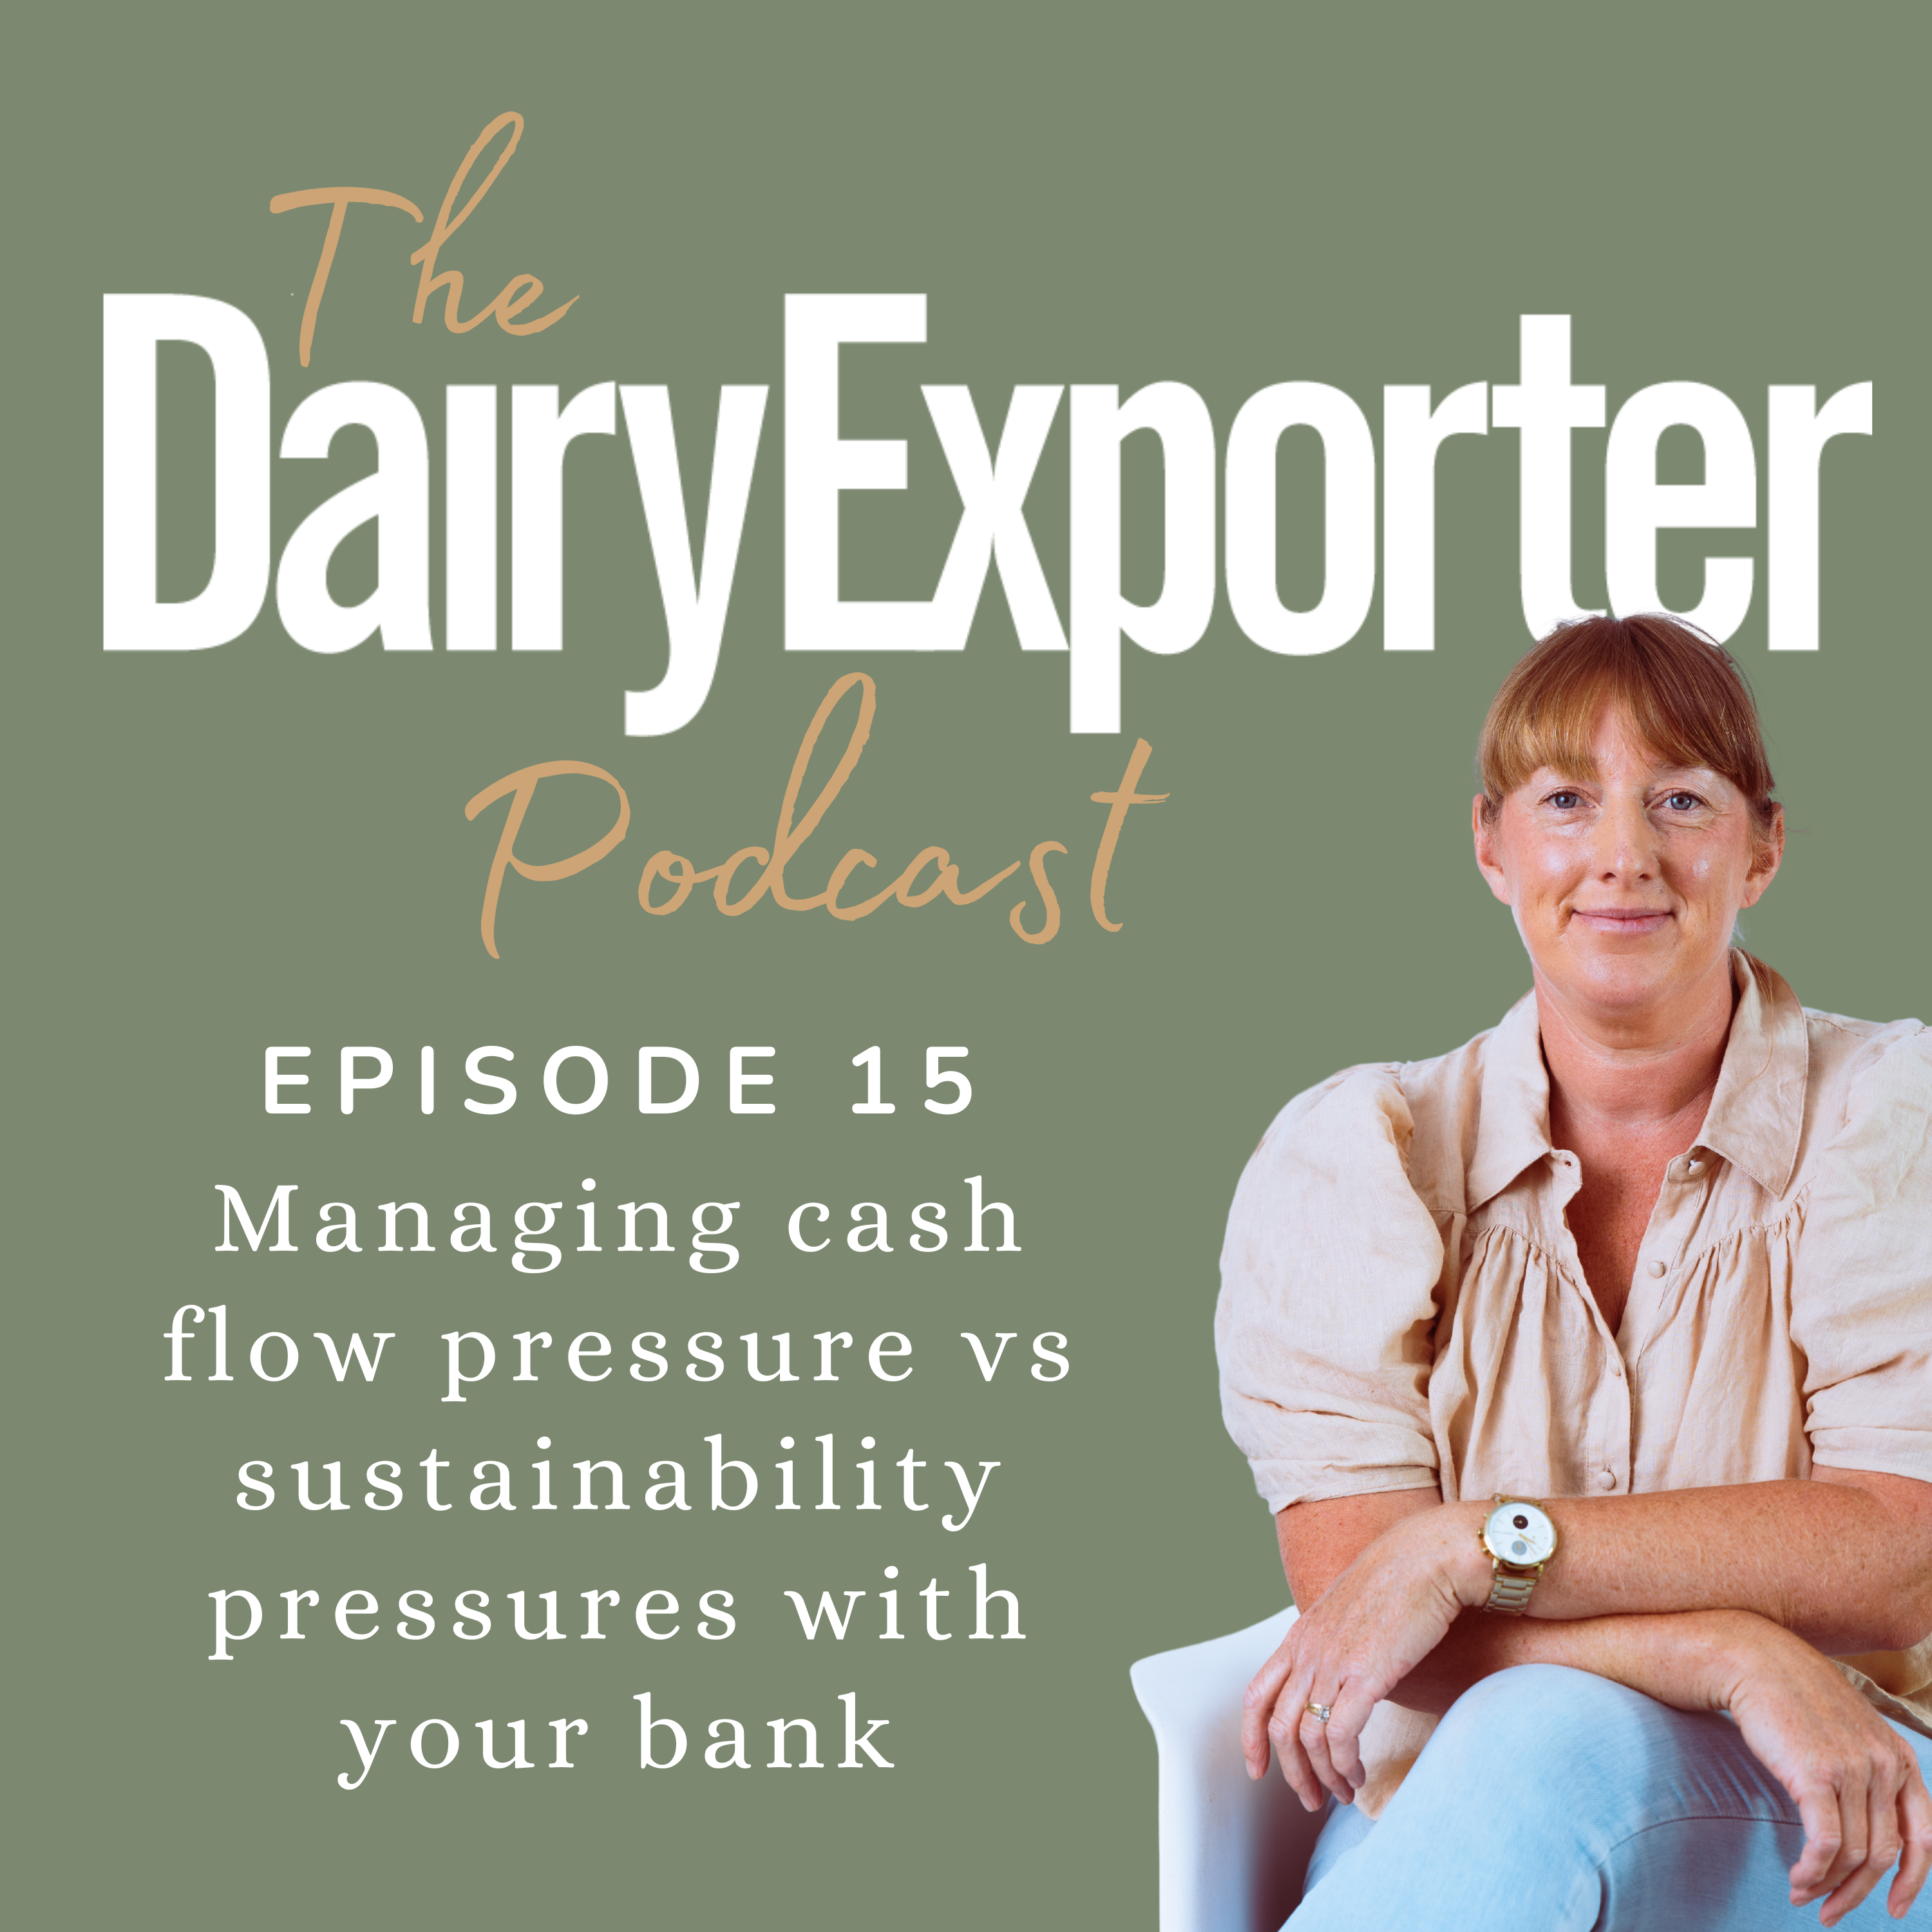 Episode 15 - Managing cash flow pressure vs sustainability pressures with your bank